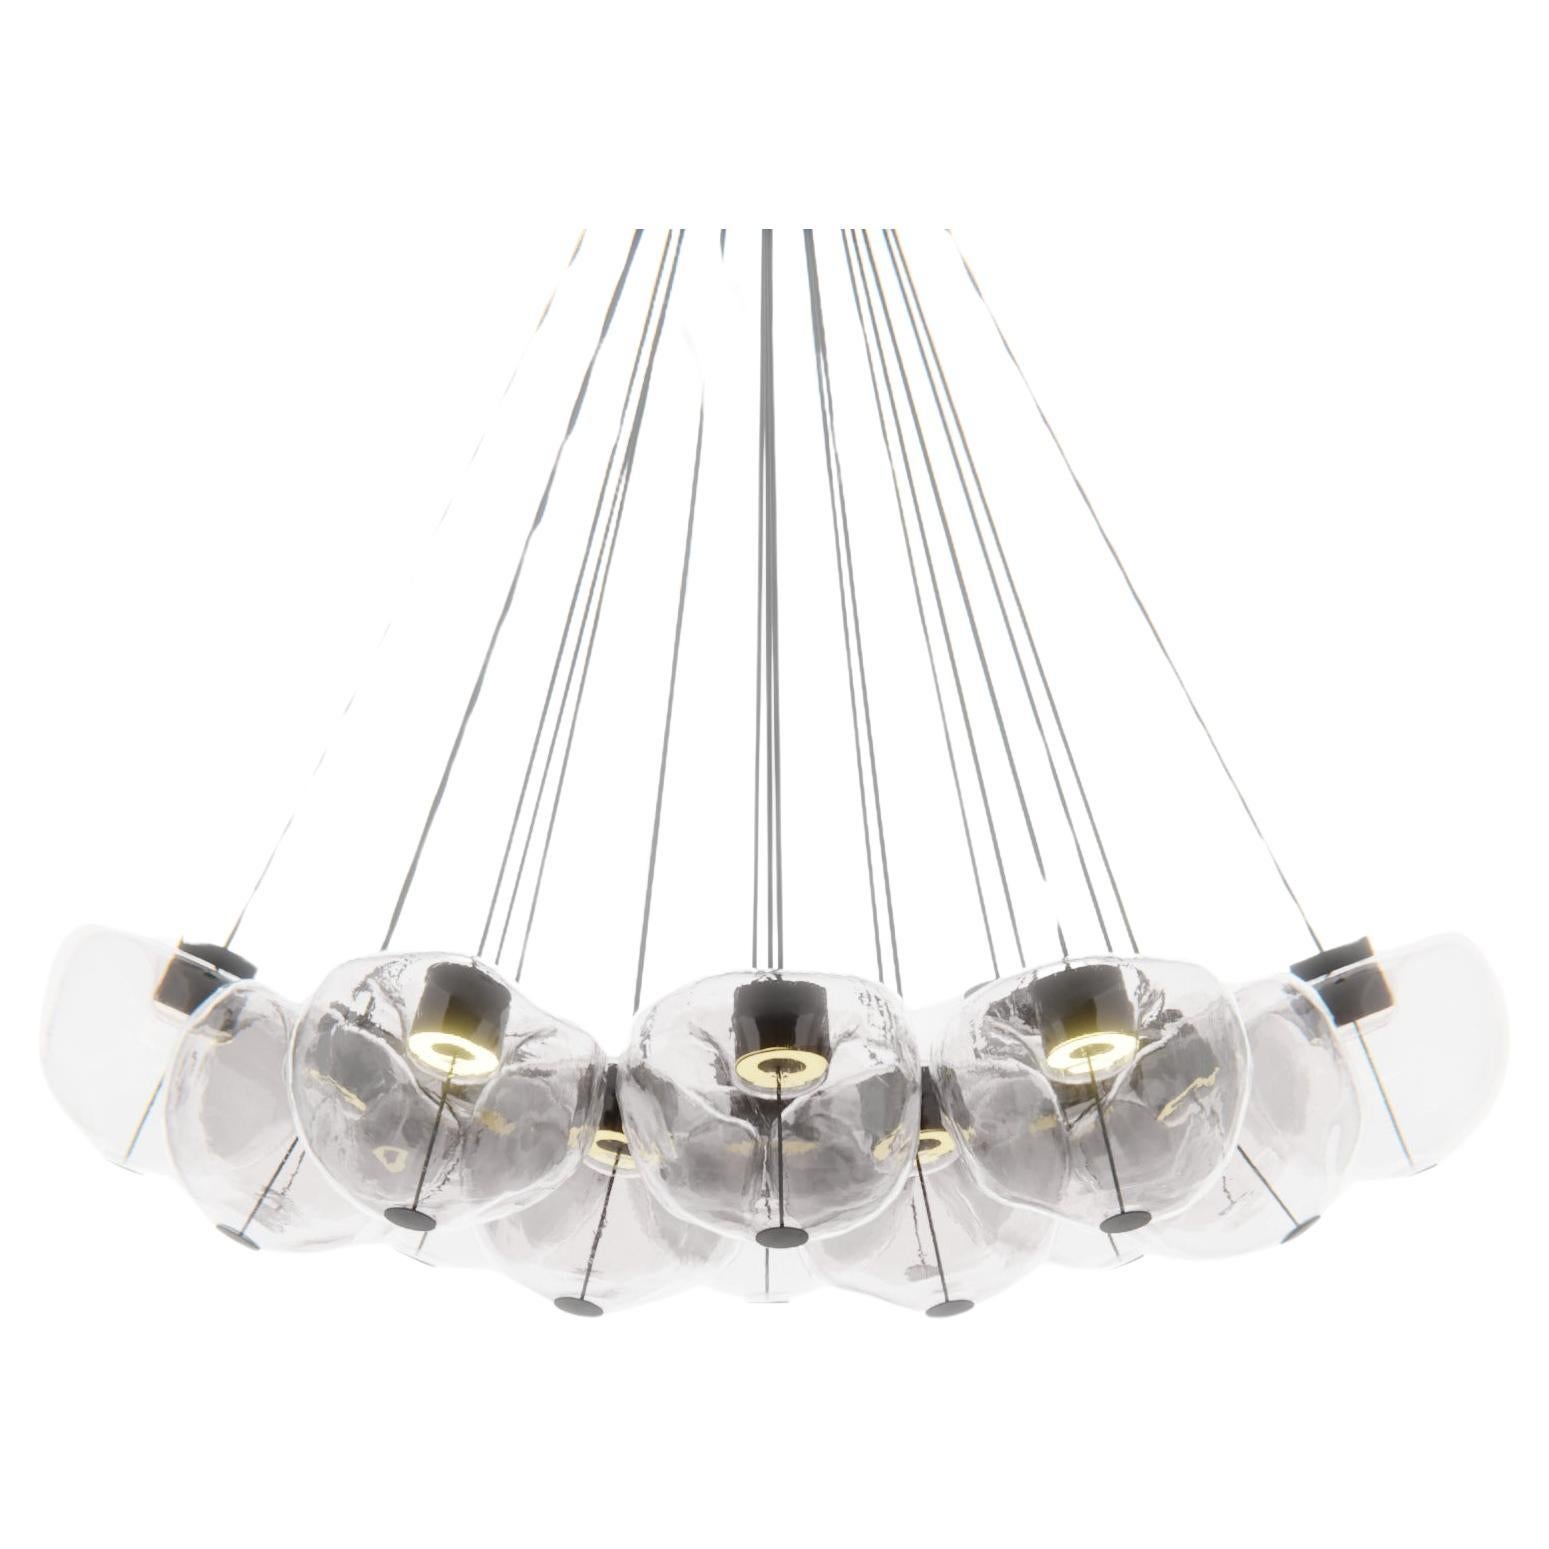 19 lights artistic Murano glass chandelier with amorphous glass spheres For Sale